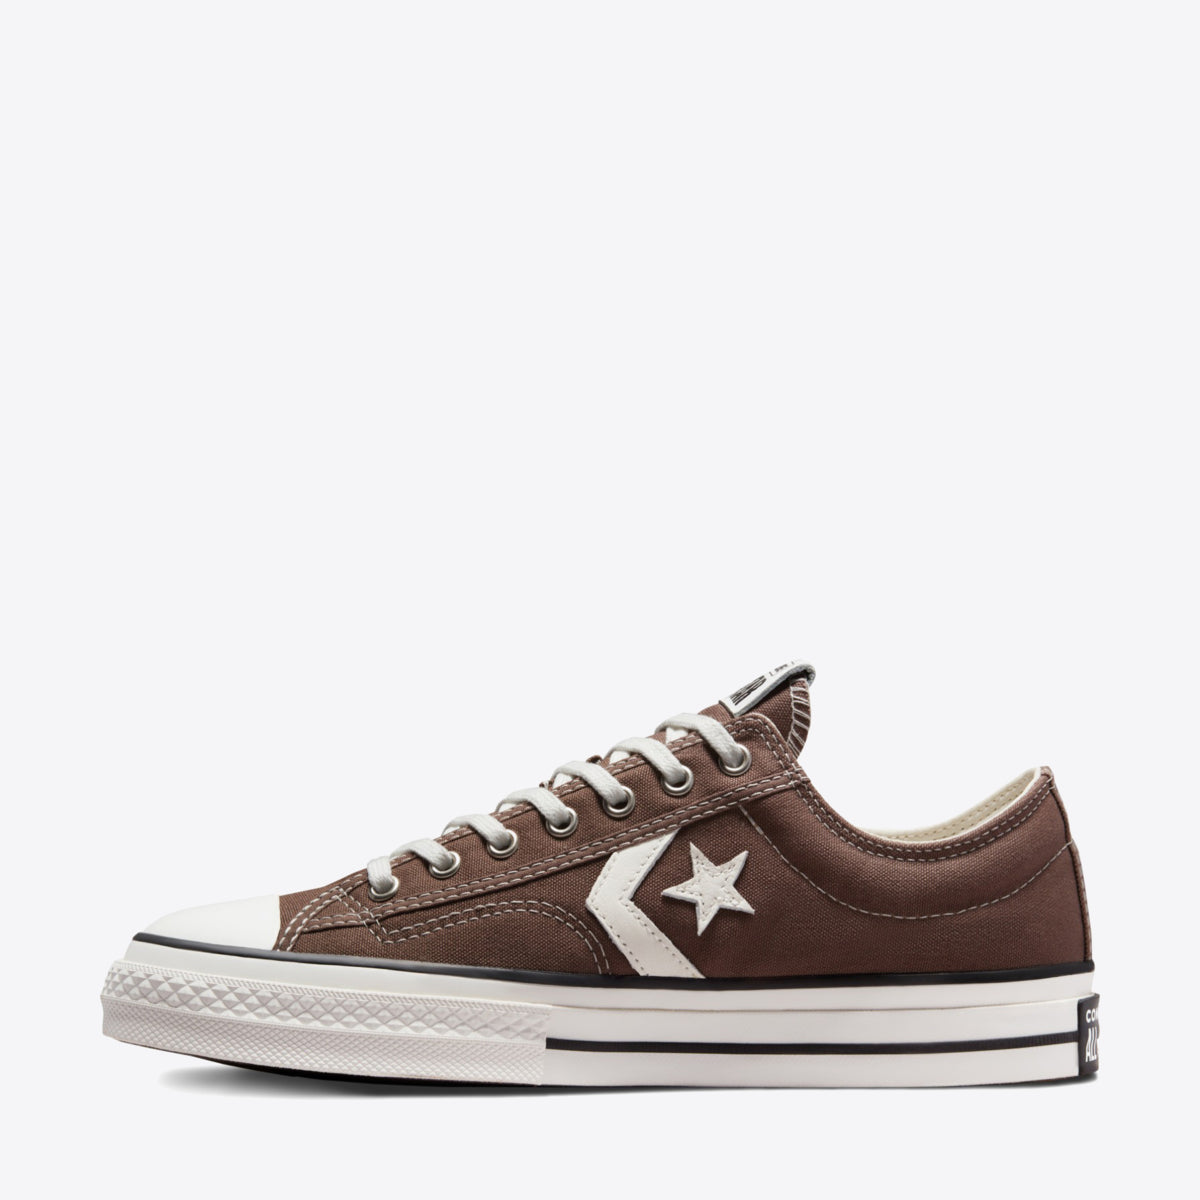 CONVERSE Star Player 76 Brown - Image 3